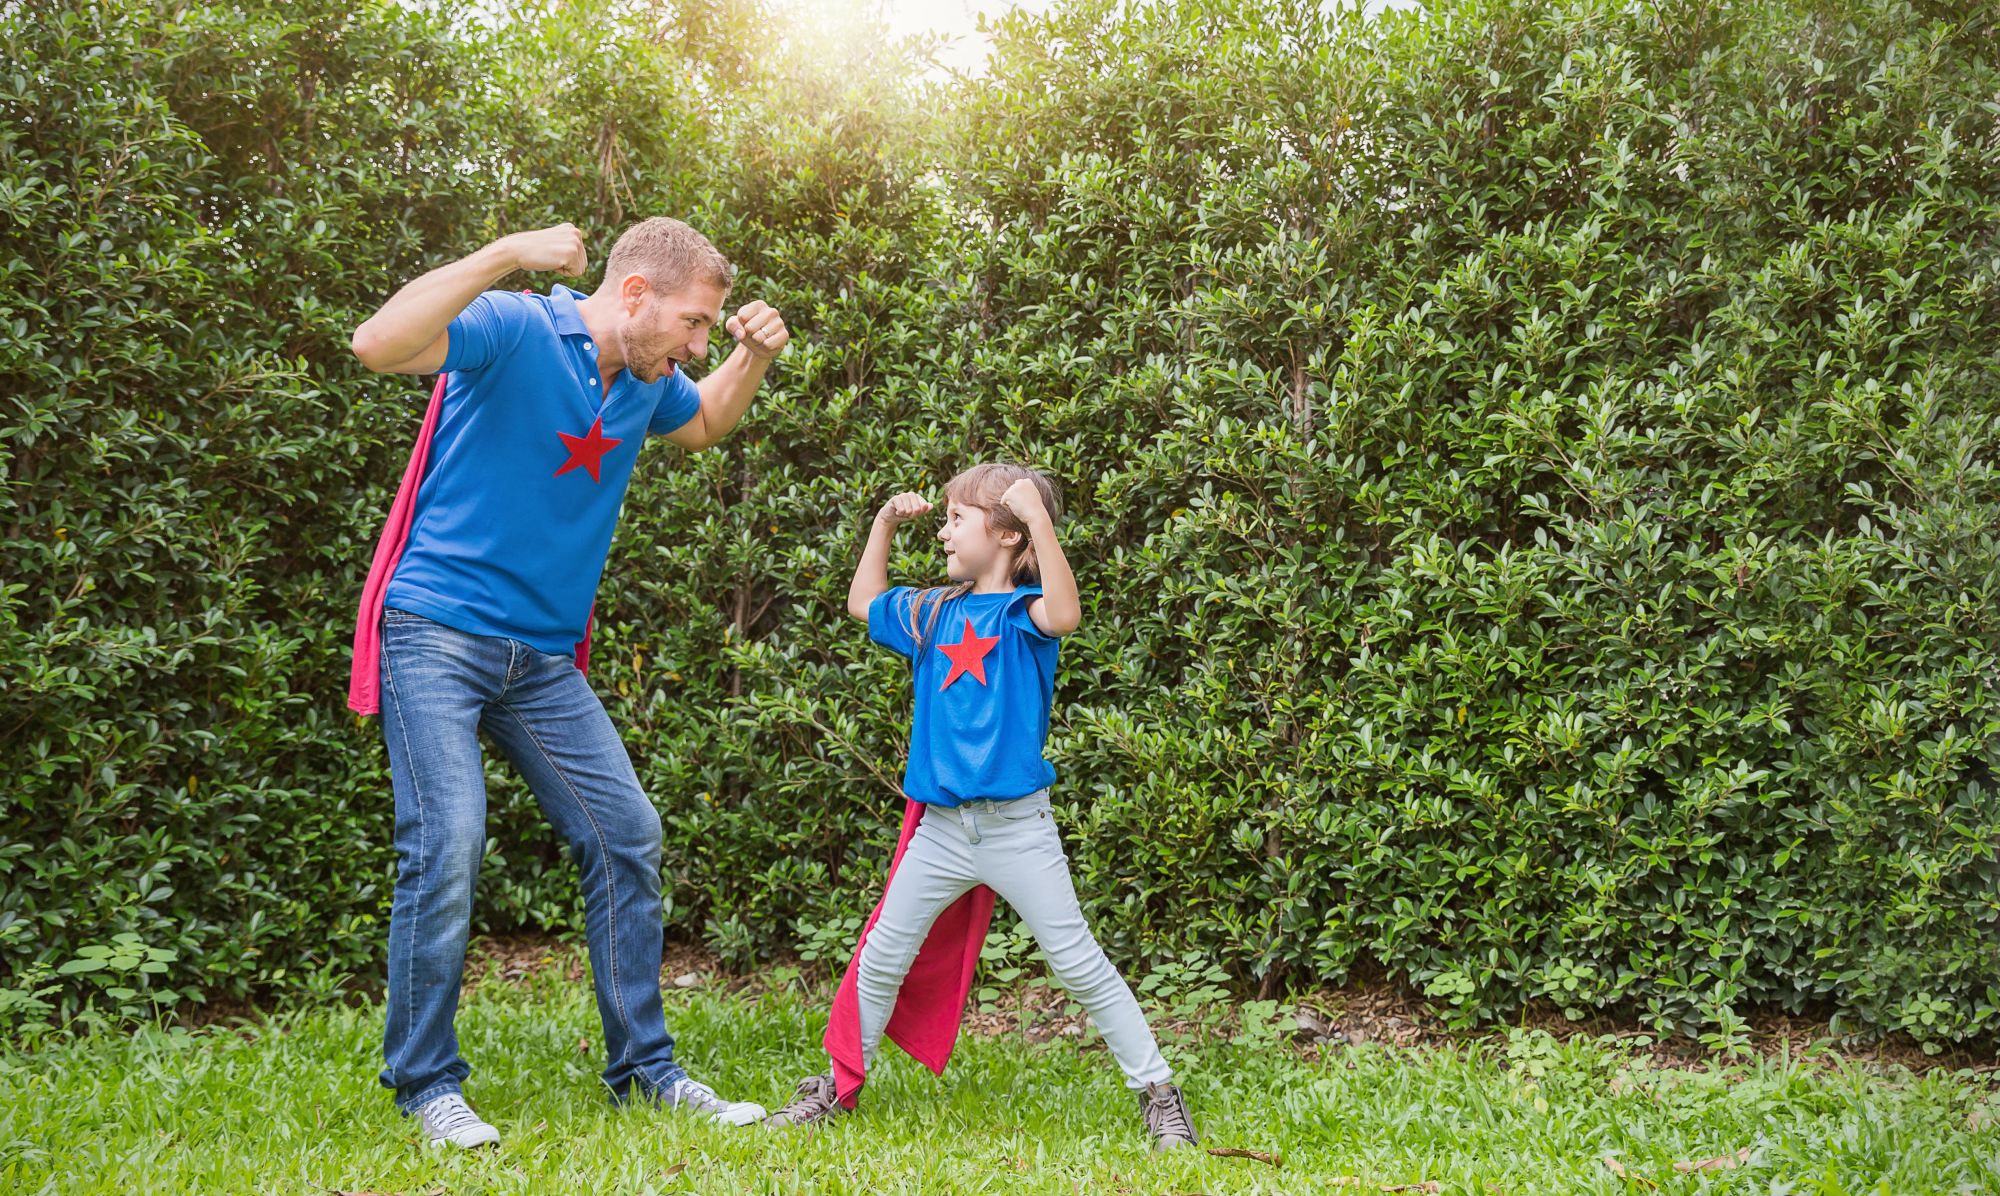 A father and his son pose as superheroes in the yard